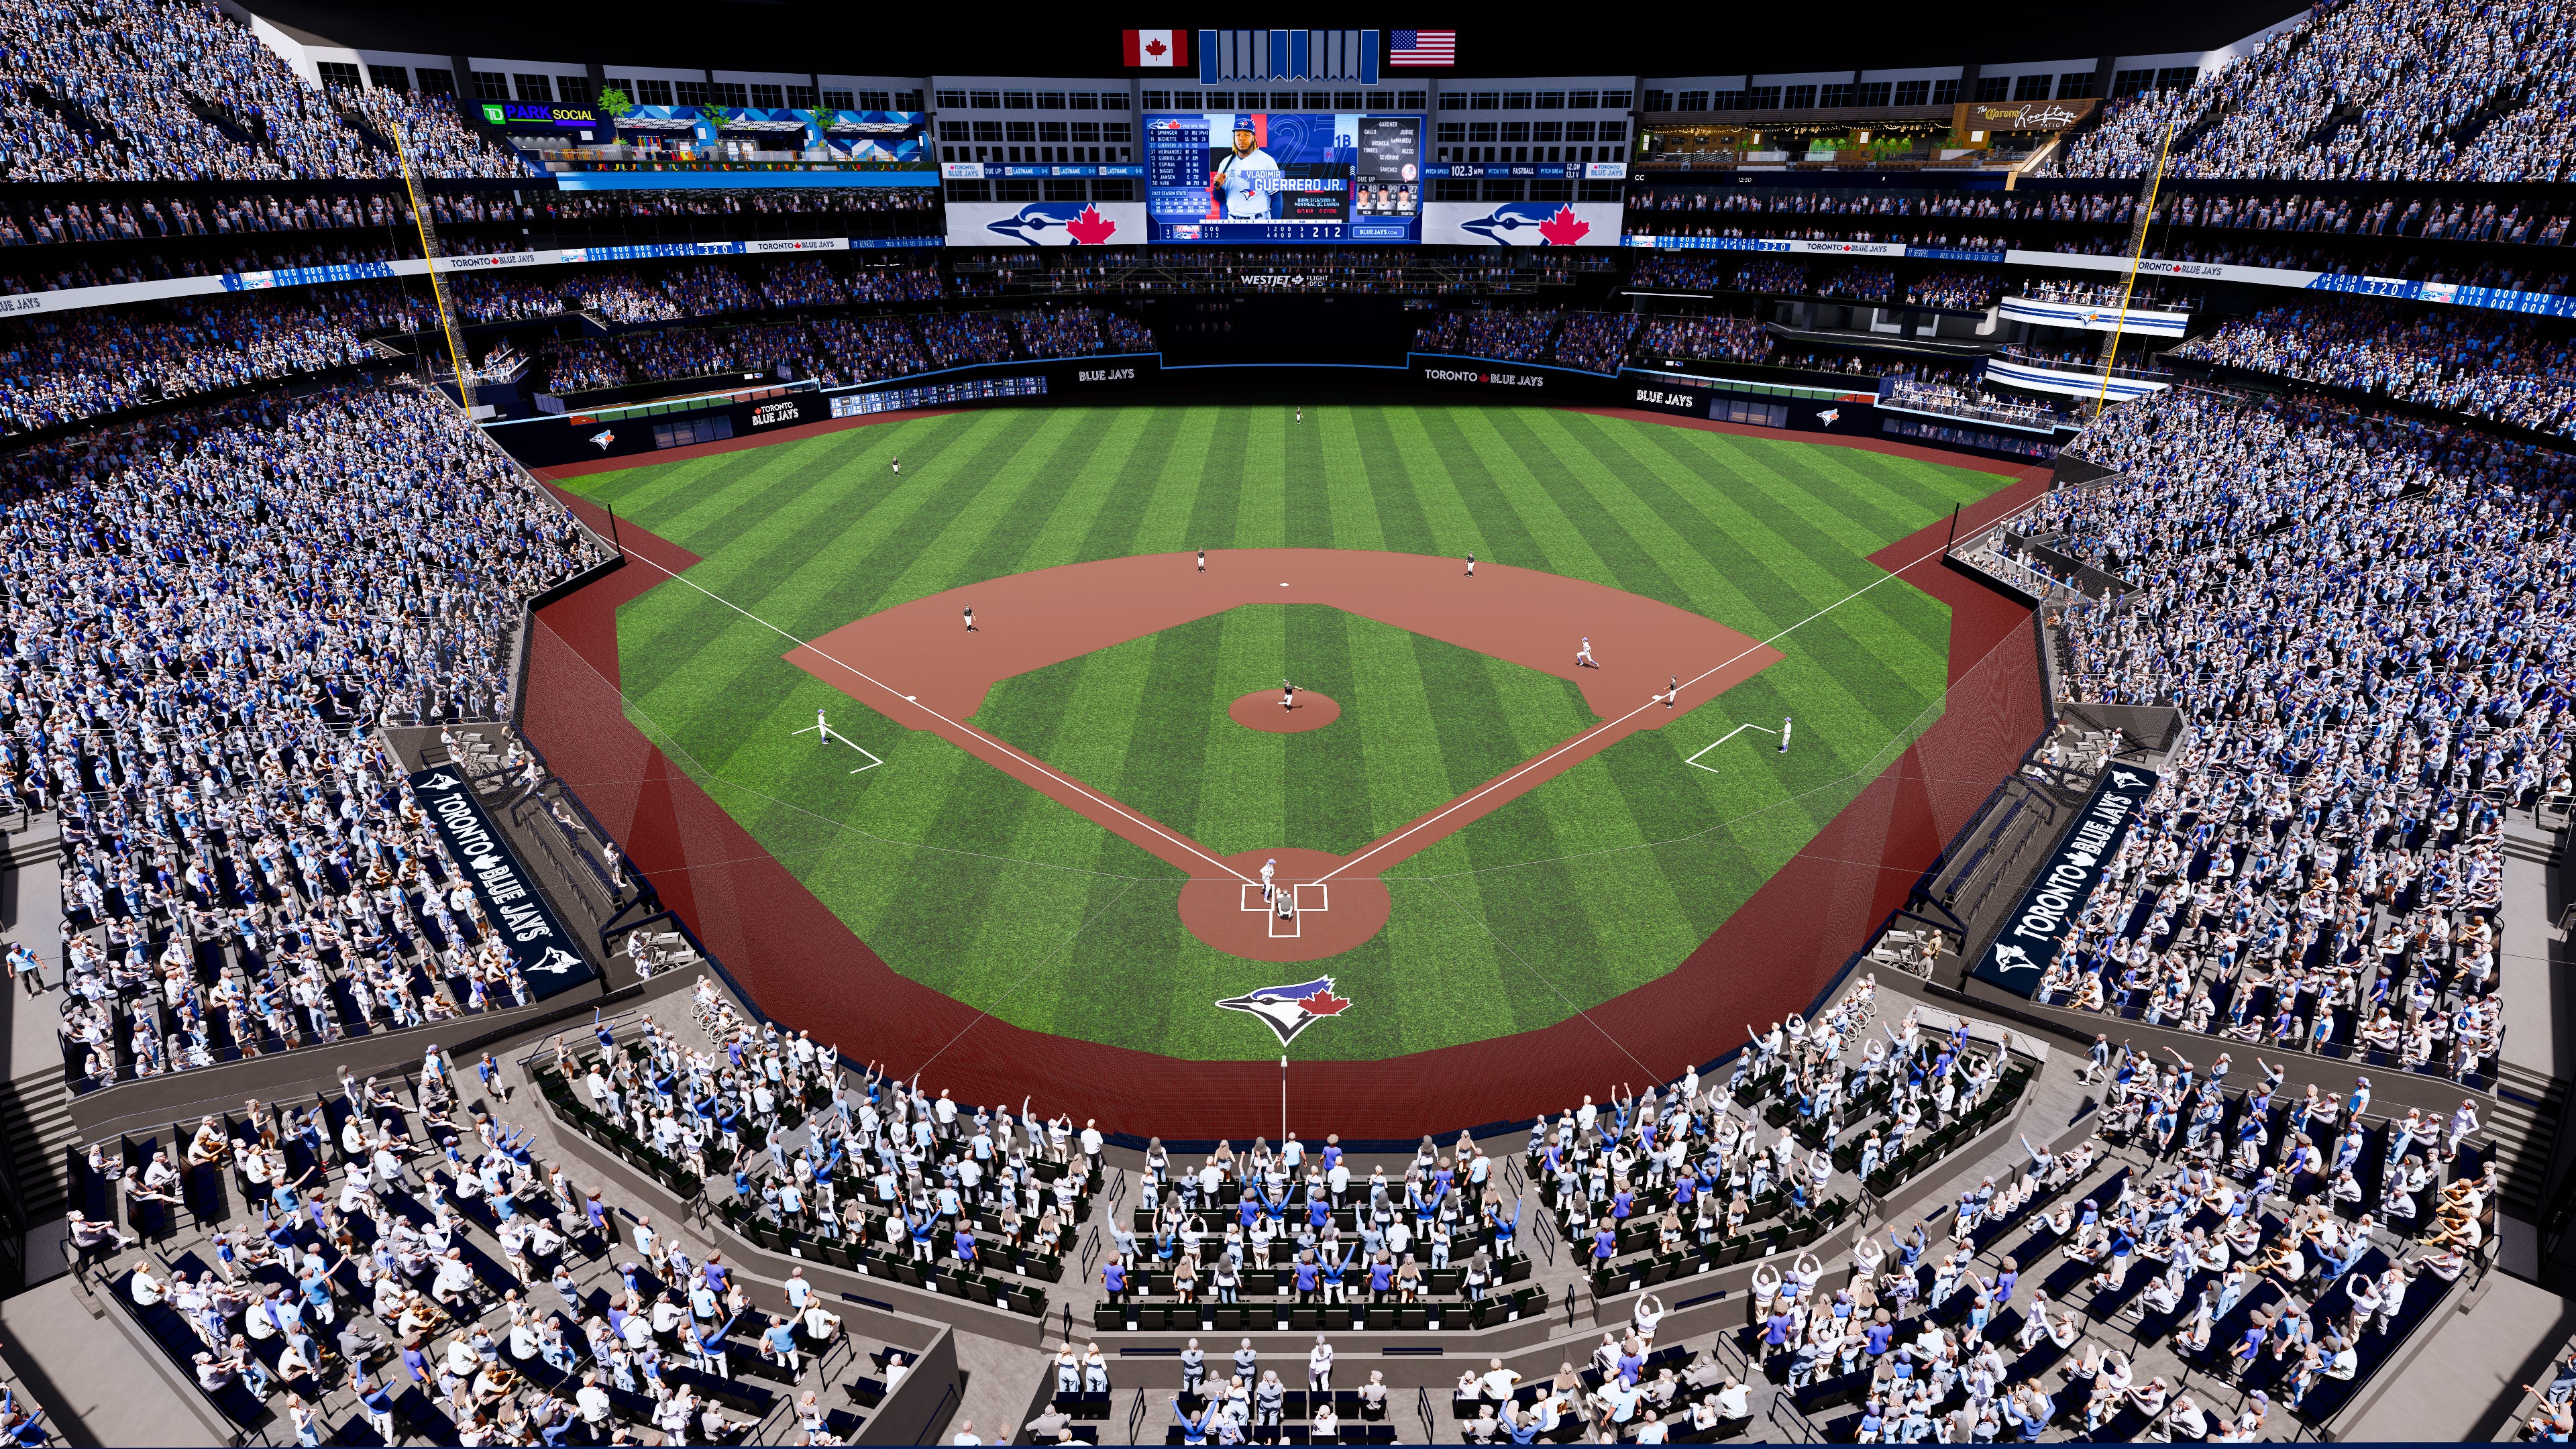 this seat at rogers centre in toronto. : r/Torontobluejays